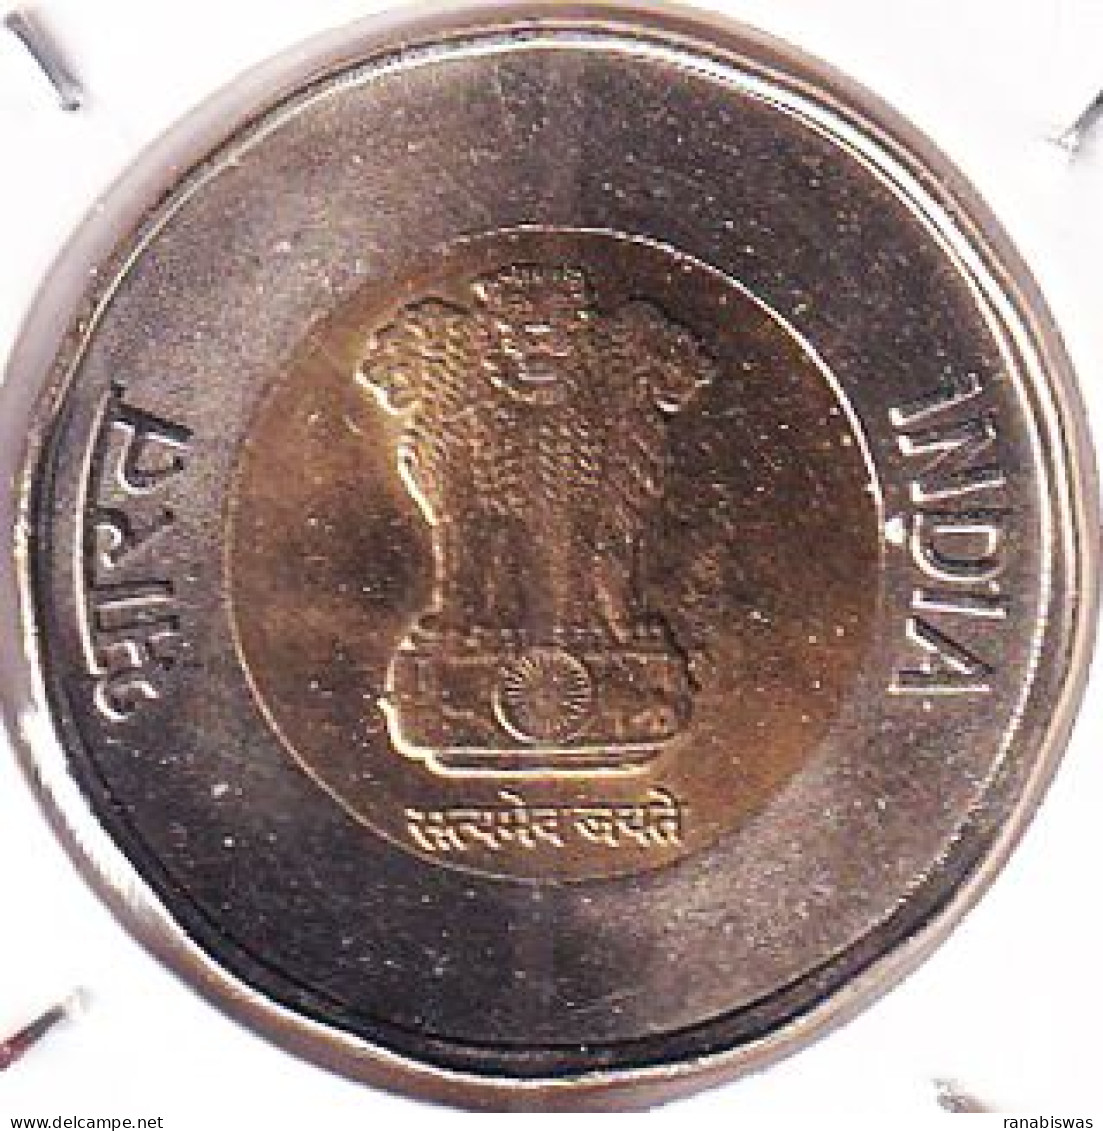 INDIA COIN LOT 444, 20 RUPEES 2022, AKAM, HYDERABAD MINT, UNC - Inde